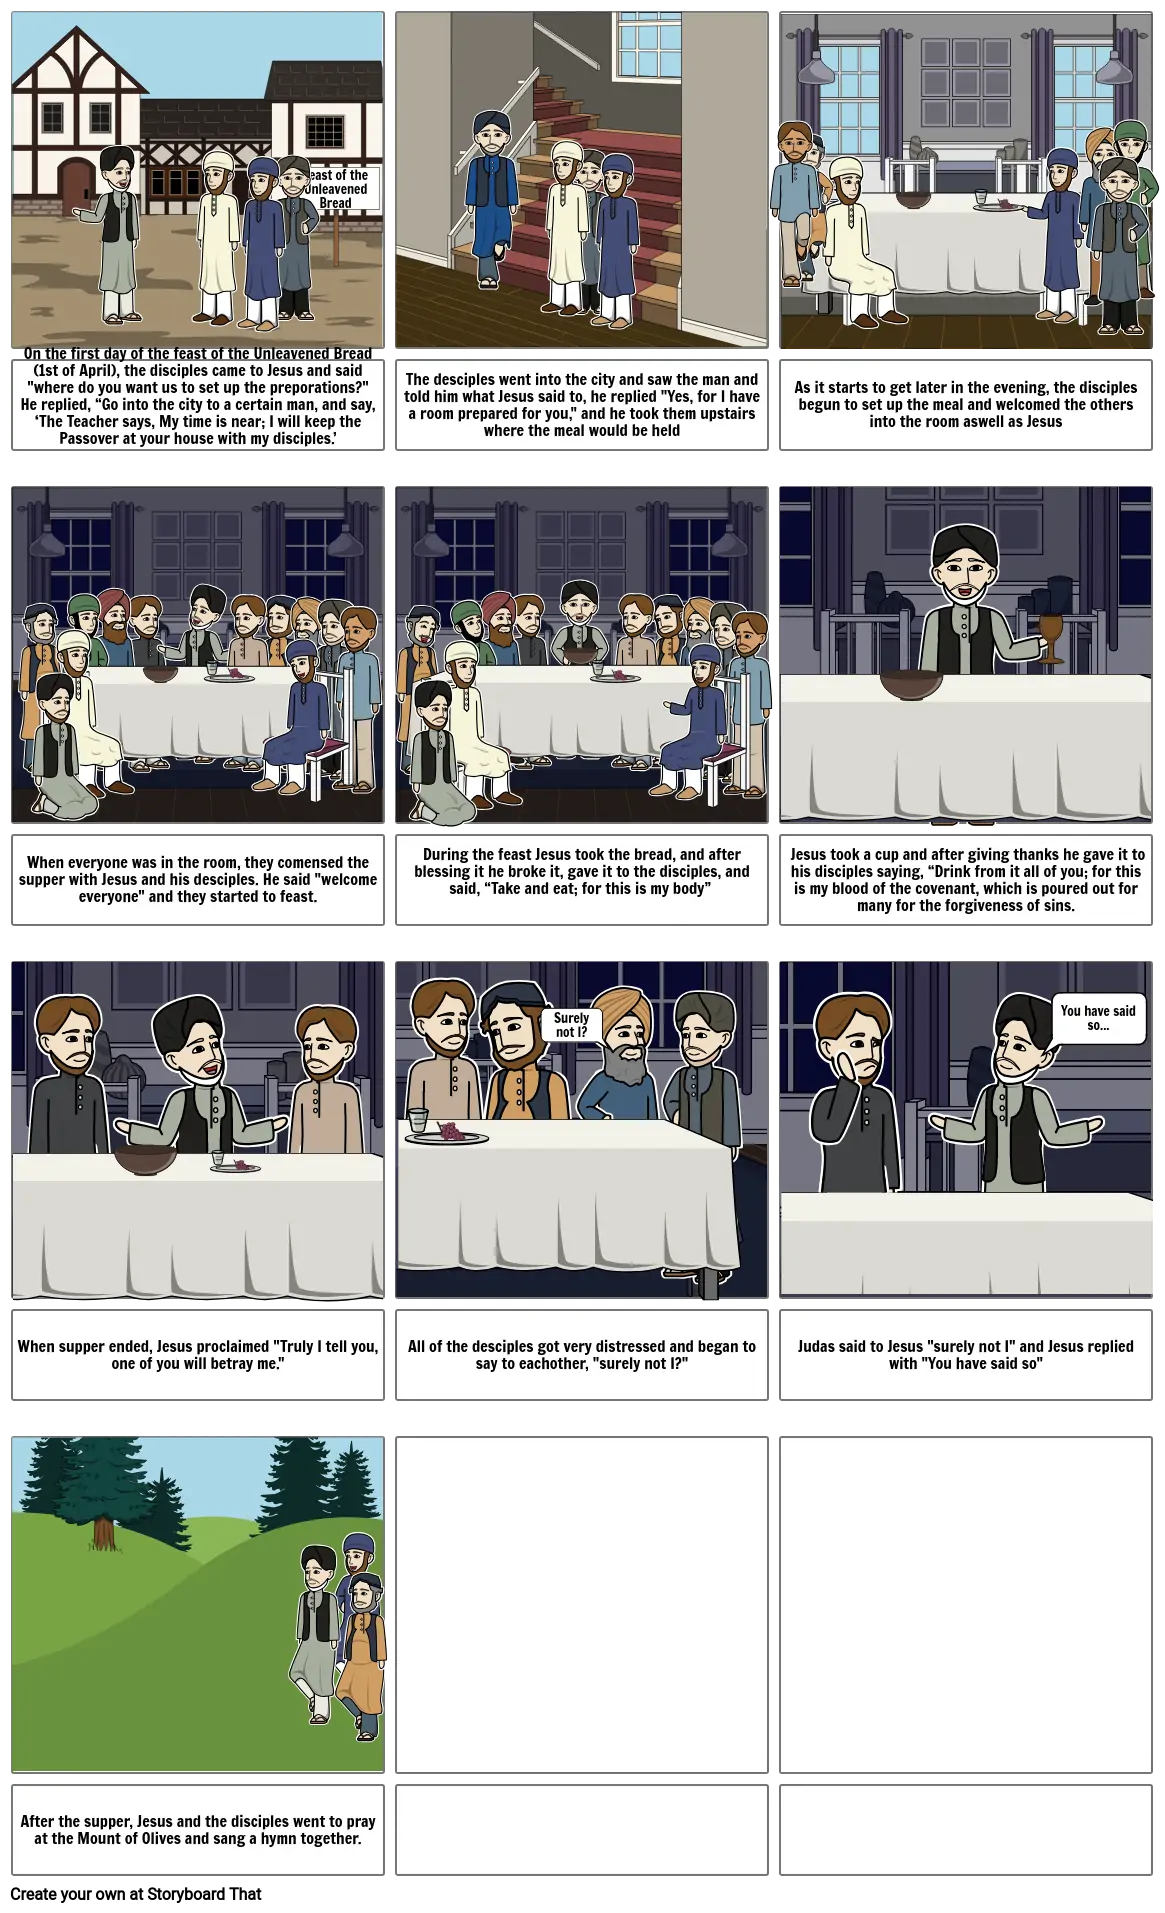 RE Assignment - The Last Supper